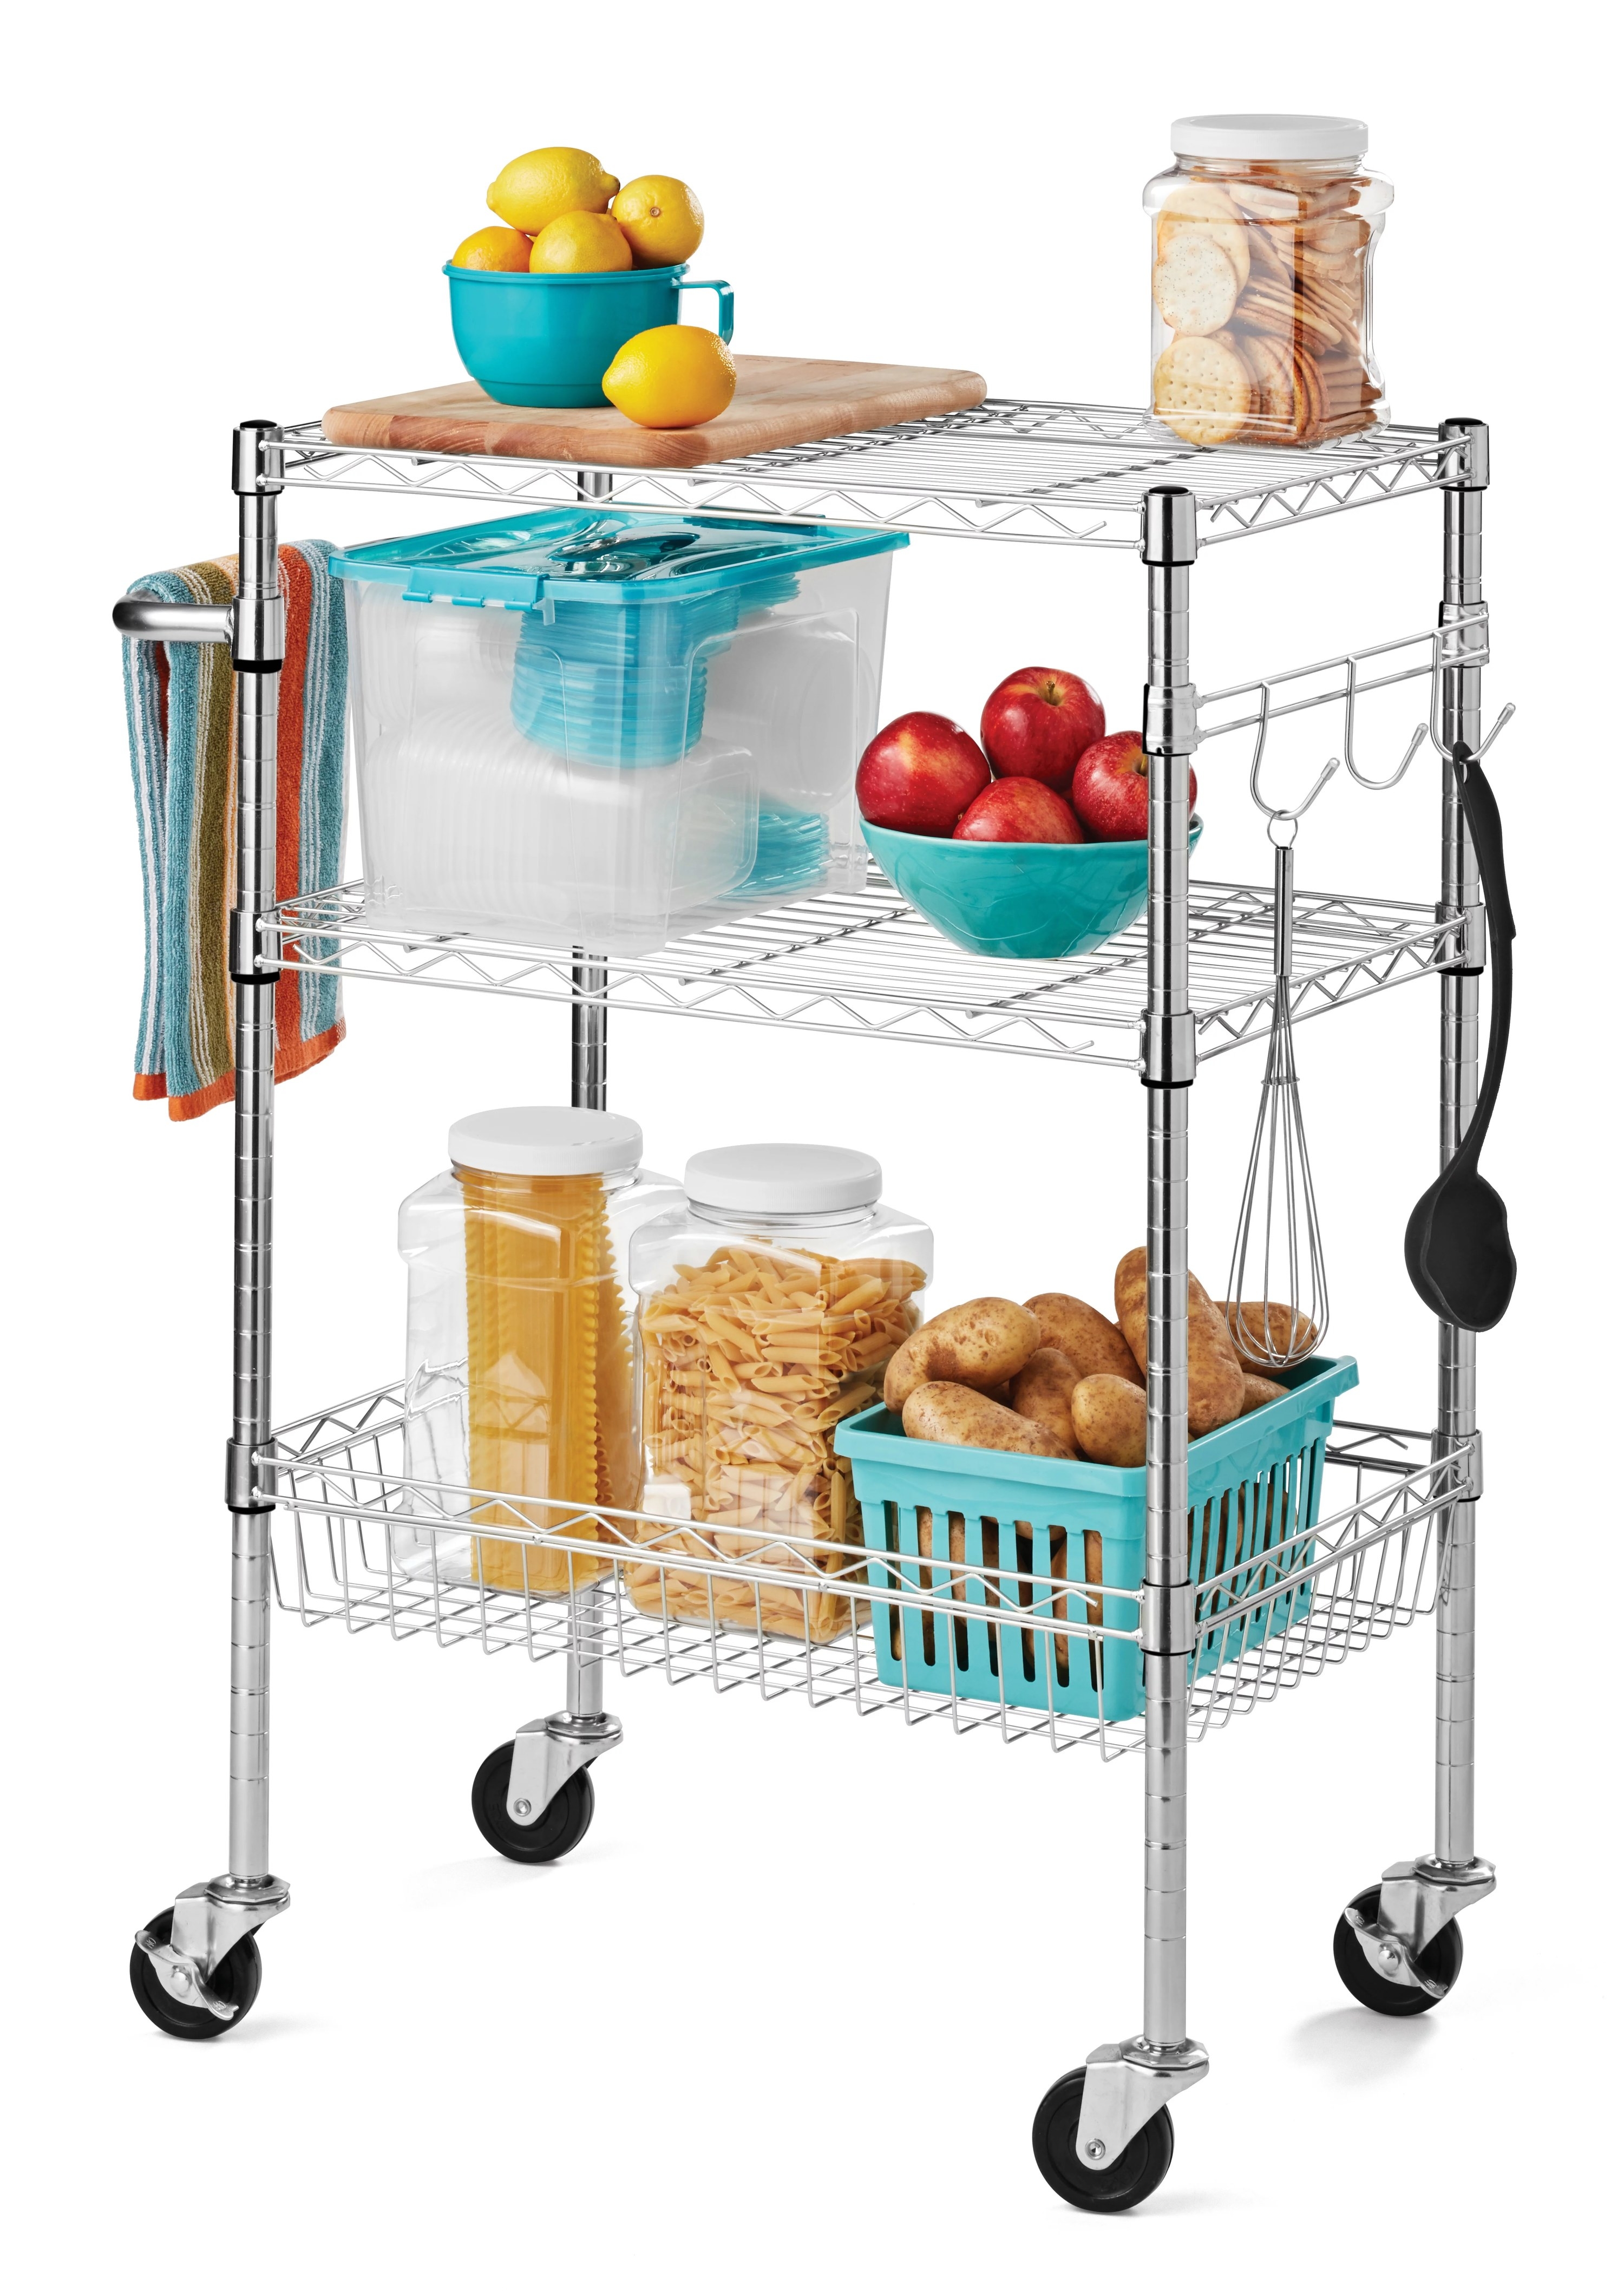 Stainless steel cart with kitchen items on shelves